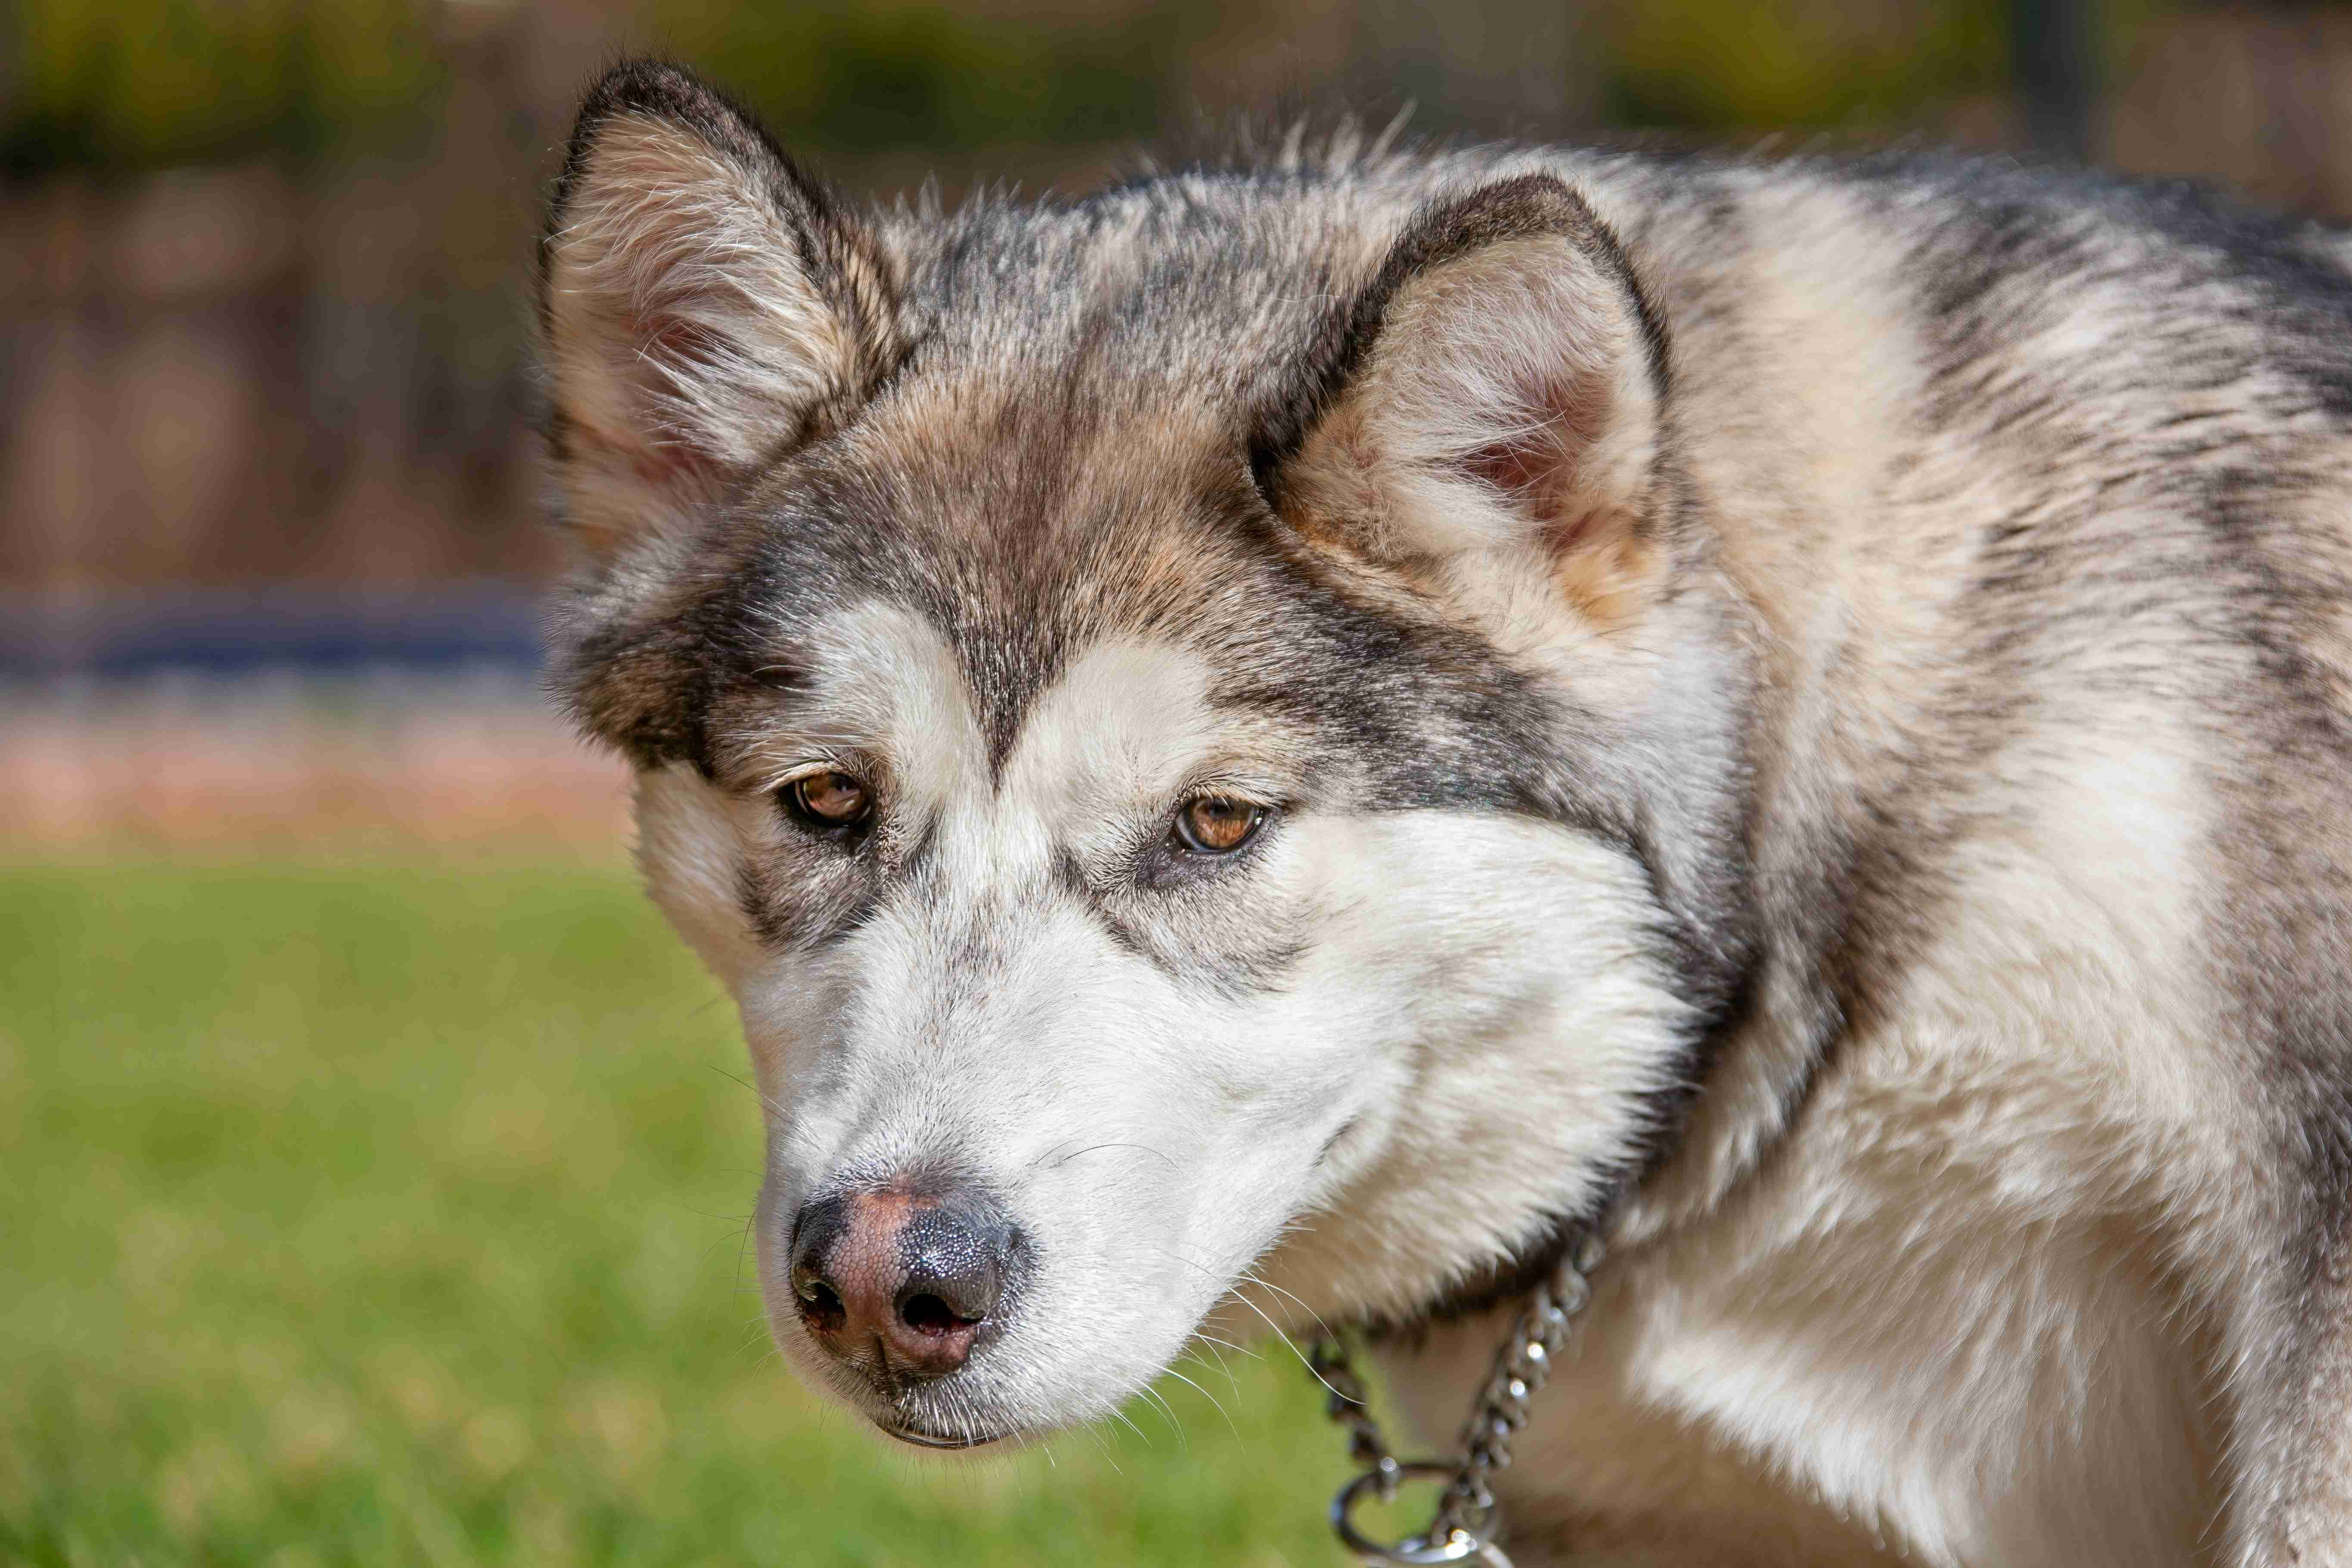 Potty Training Your Alaskan Malamute Puppy: The Ultimate Guide